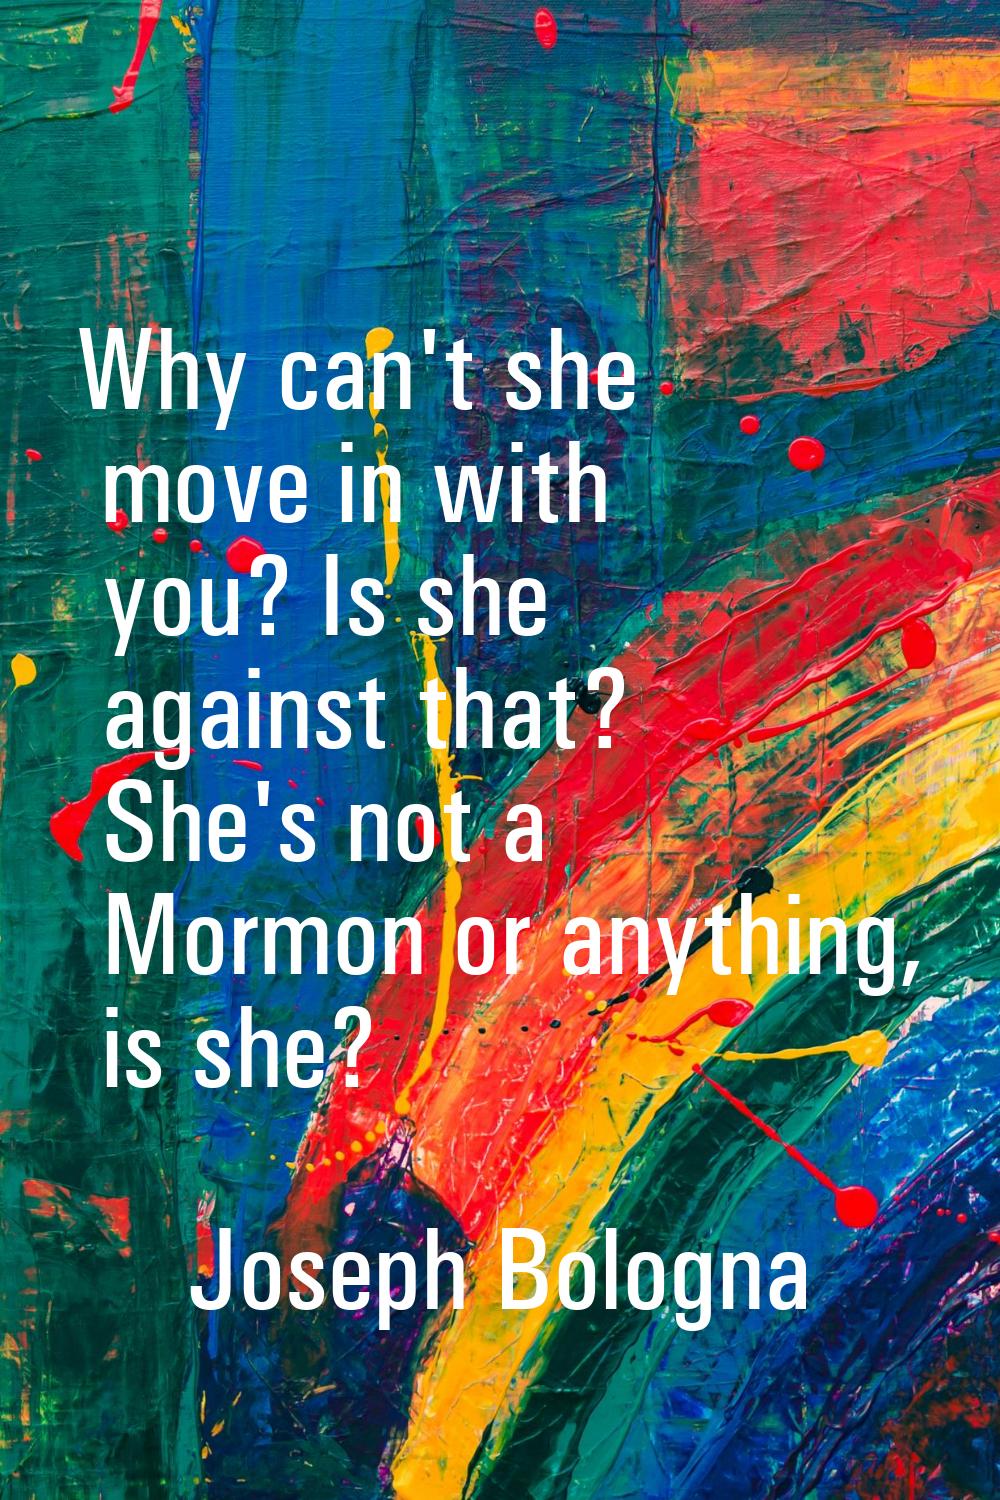 Why can't she move in with you? Is she against that? She's not a Mormon or anything, is she?